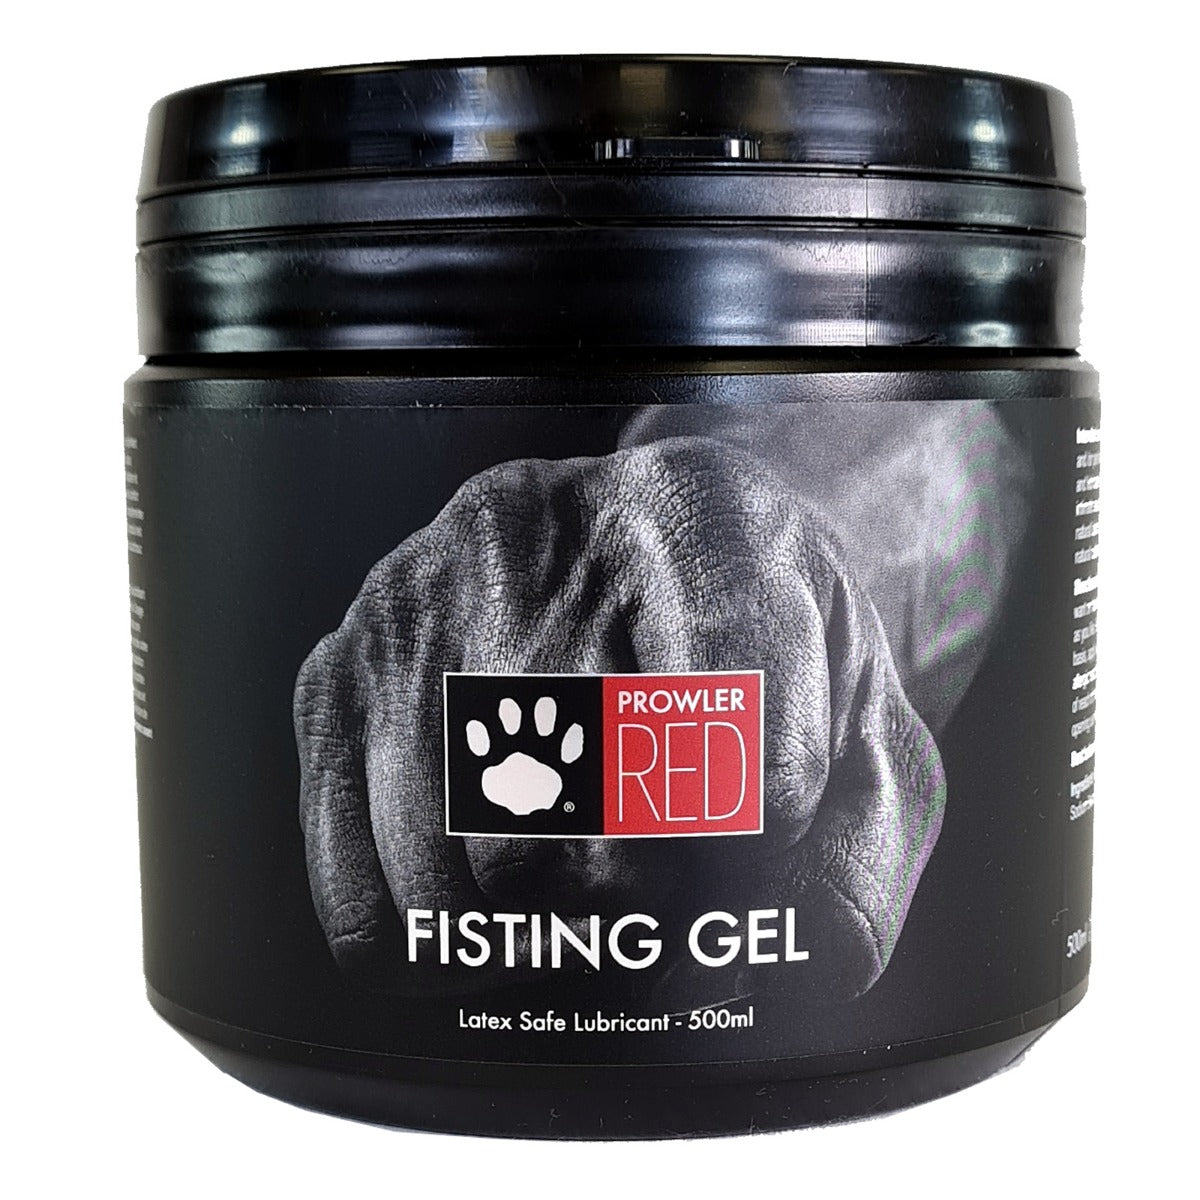 Fisting Cream & Anal Relaxants Prowler RED Fisting Gel 500ml   